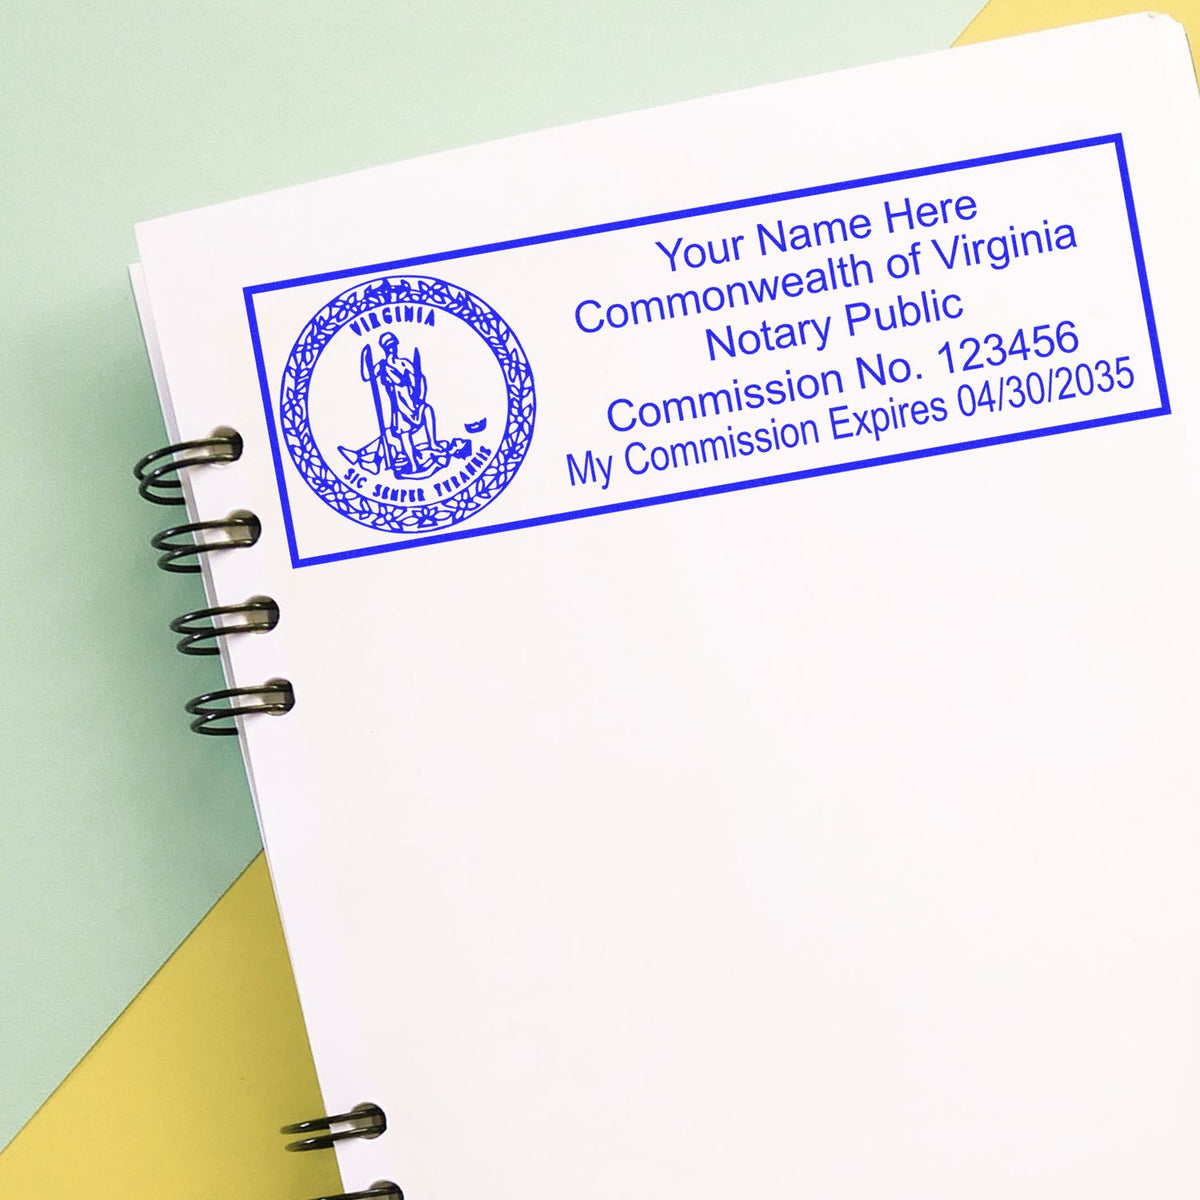 A lifestyle photo showing a stamped image of the Wooden Handle Virginia State Seal Notary Public Stamp on a piece of paper